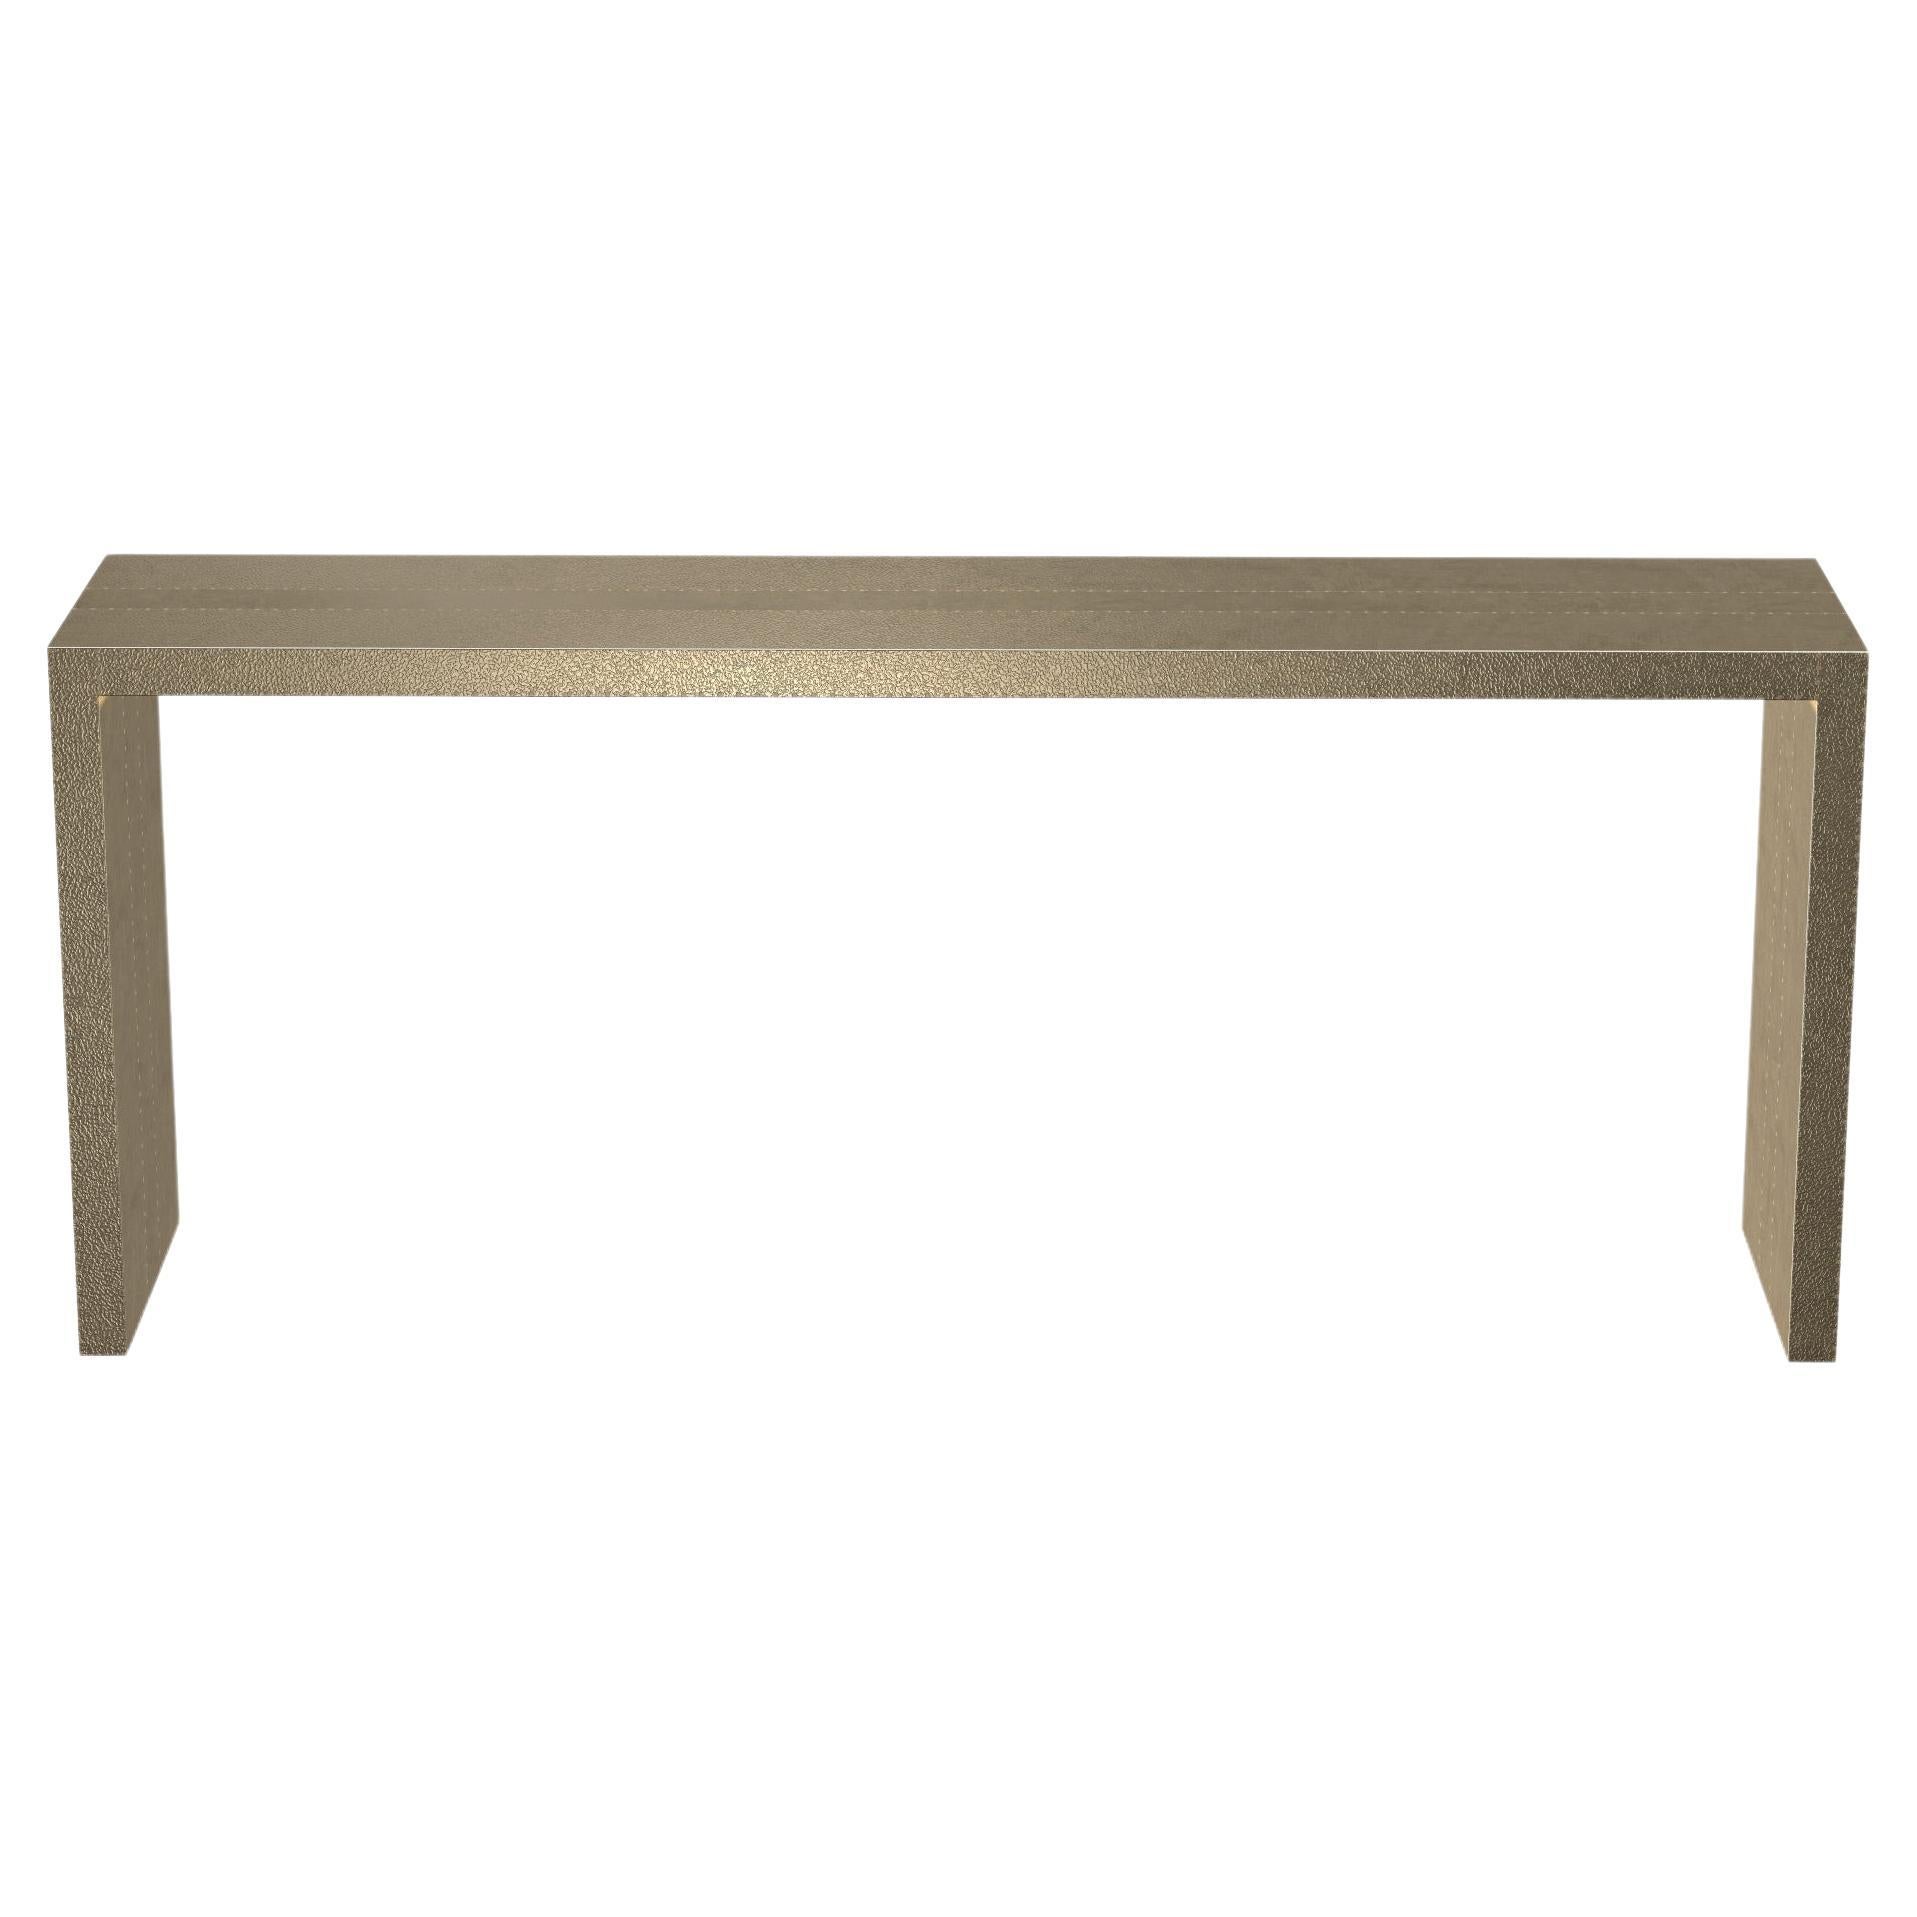 Art Deco Conference Console Tables in Copper Fine Hammered by Alison Spear